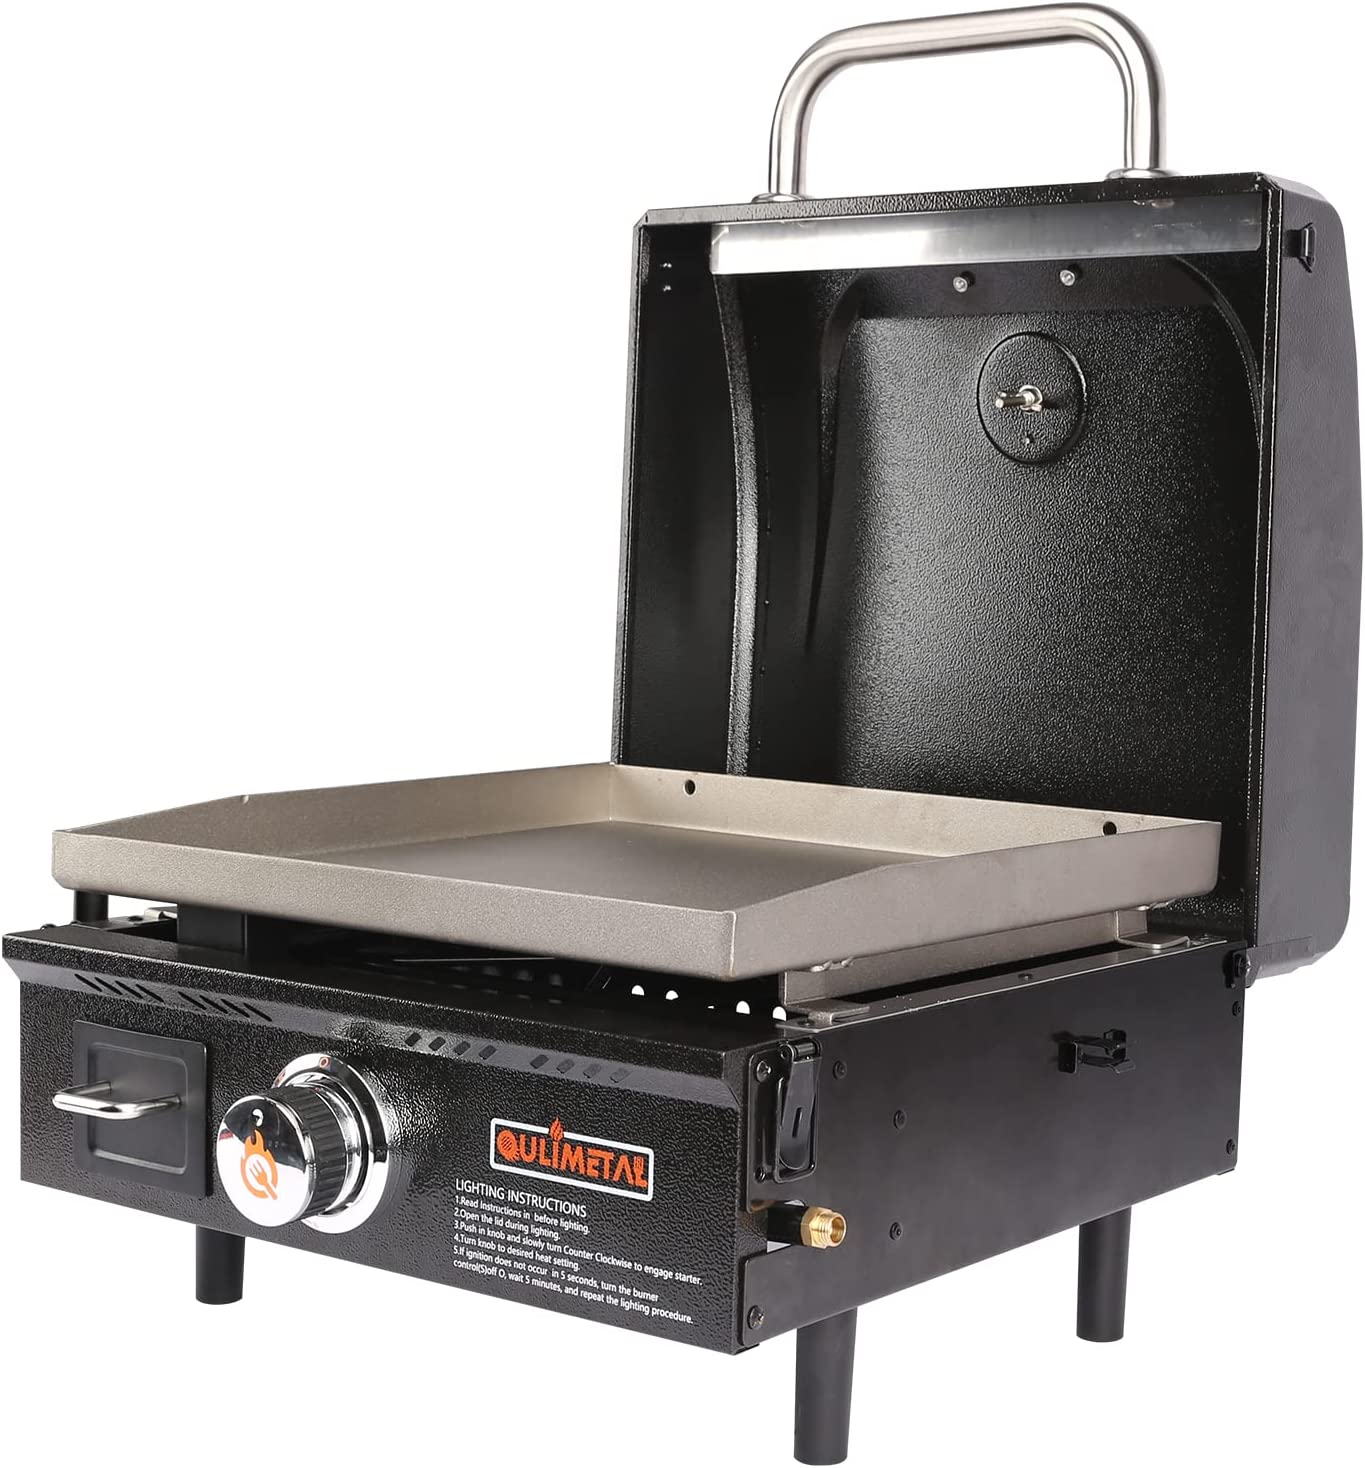 Blackstone Original 22in Griddle w/Hood and Carry Bag